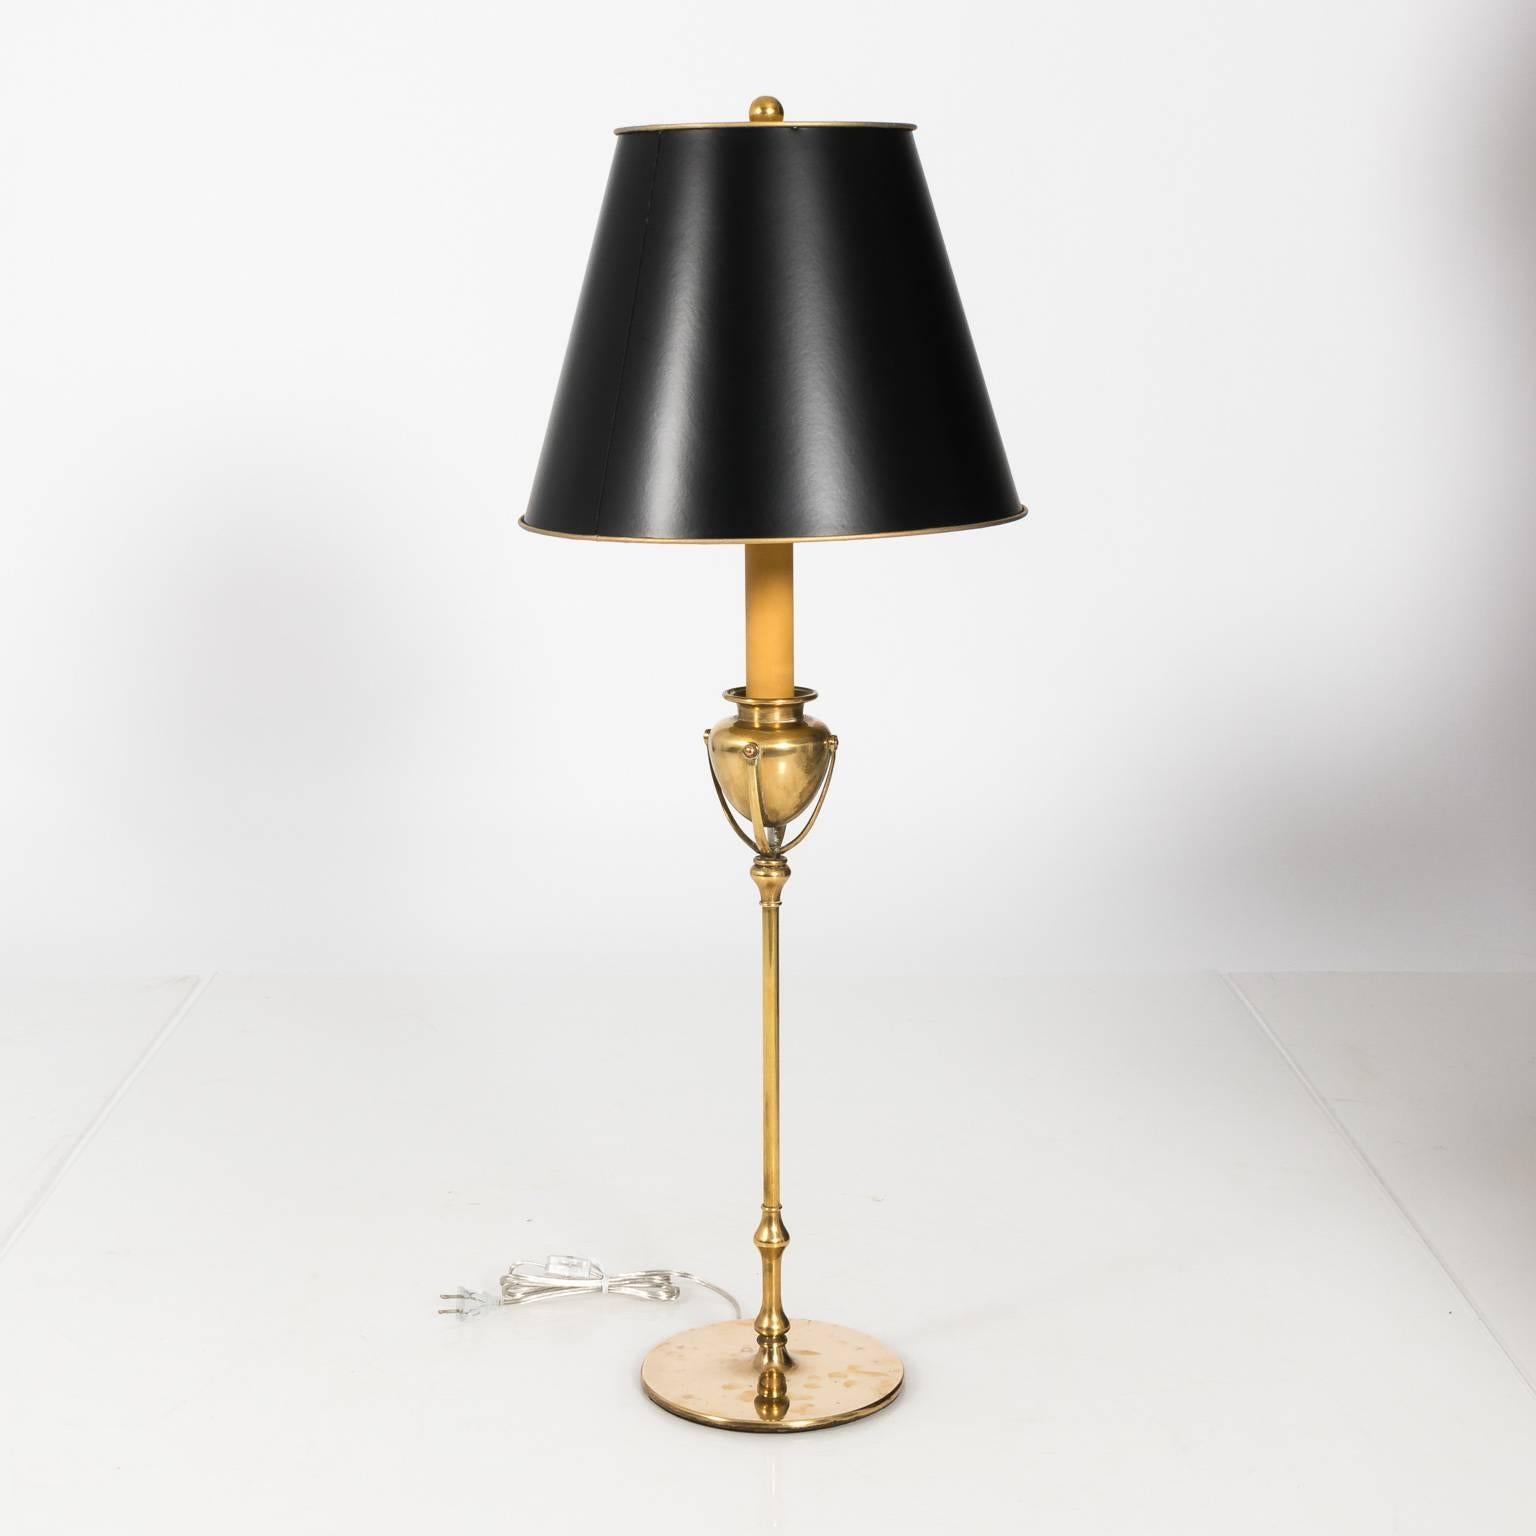 20th Century Pair of Neoclassical Urn Table Lamps